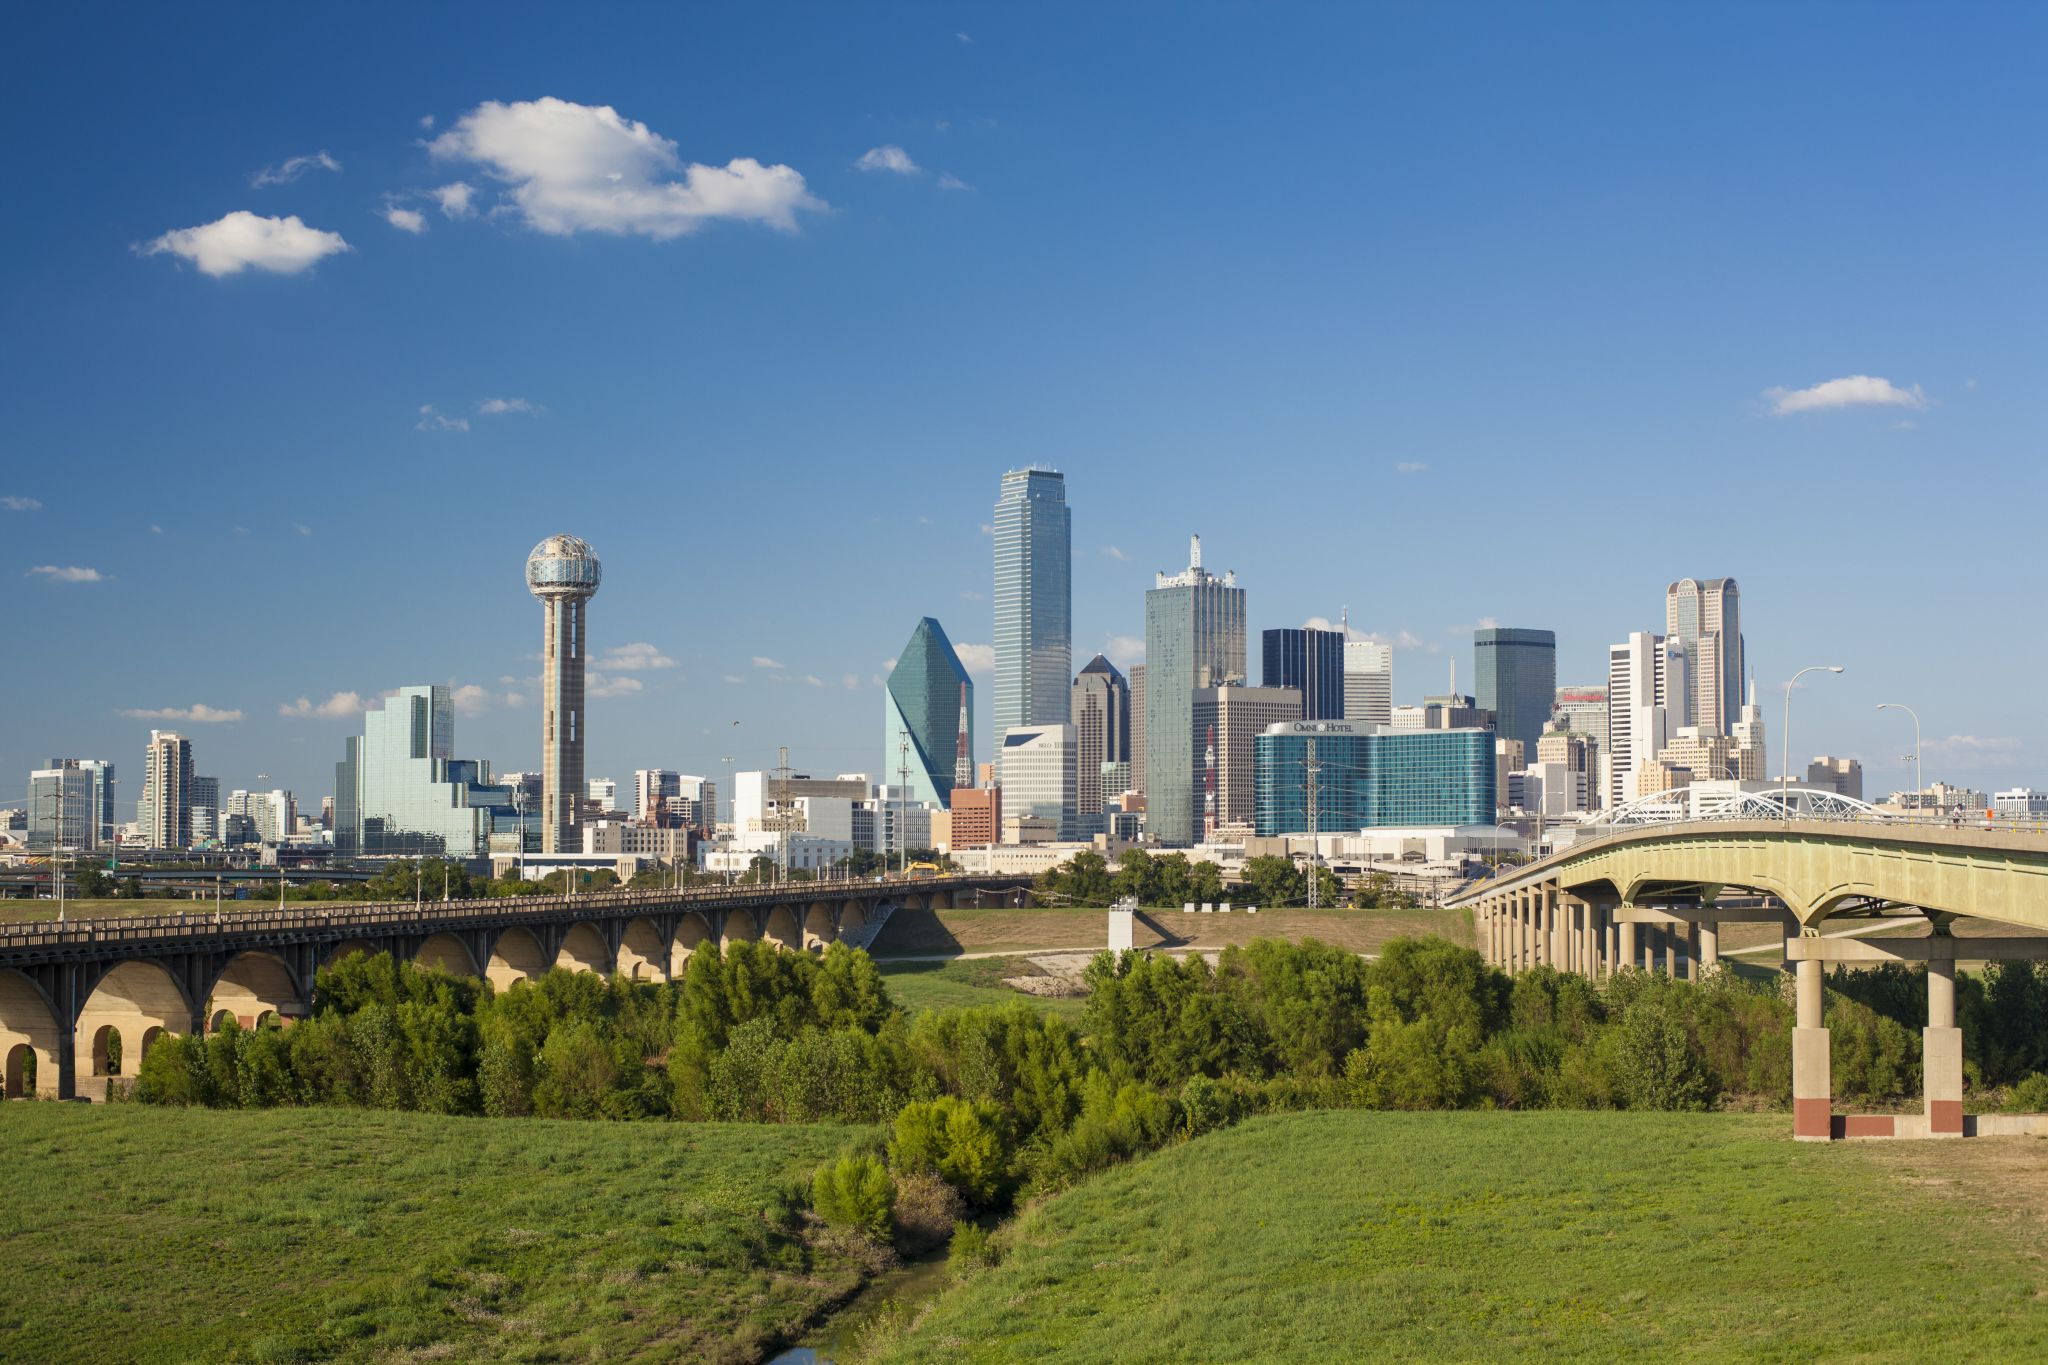 are-texas-big-cities-headed-for-a-dystopian-future-an-effort-in-dallas-aims-to-prevent-that